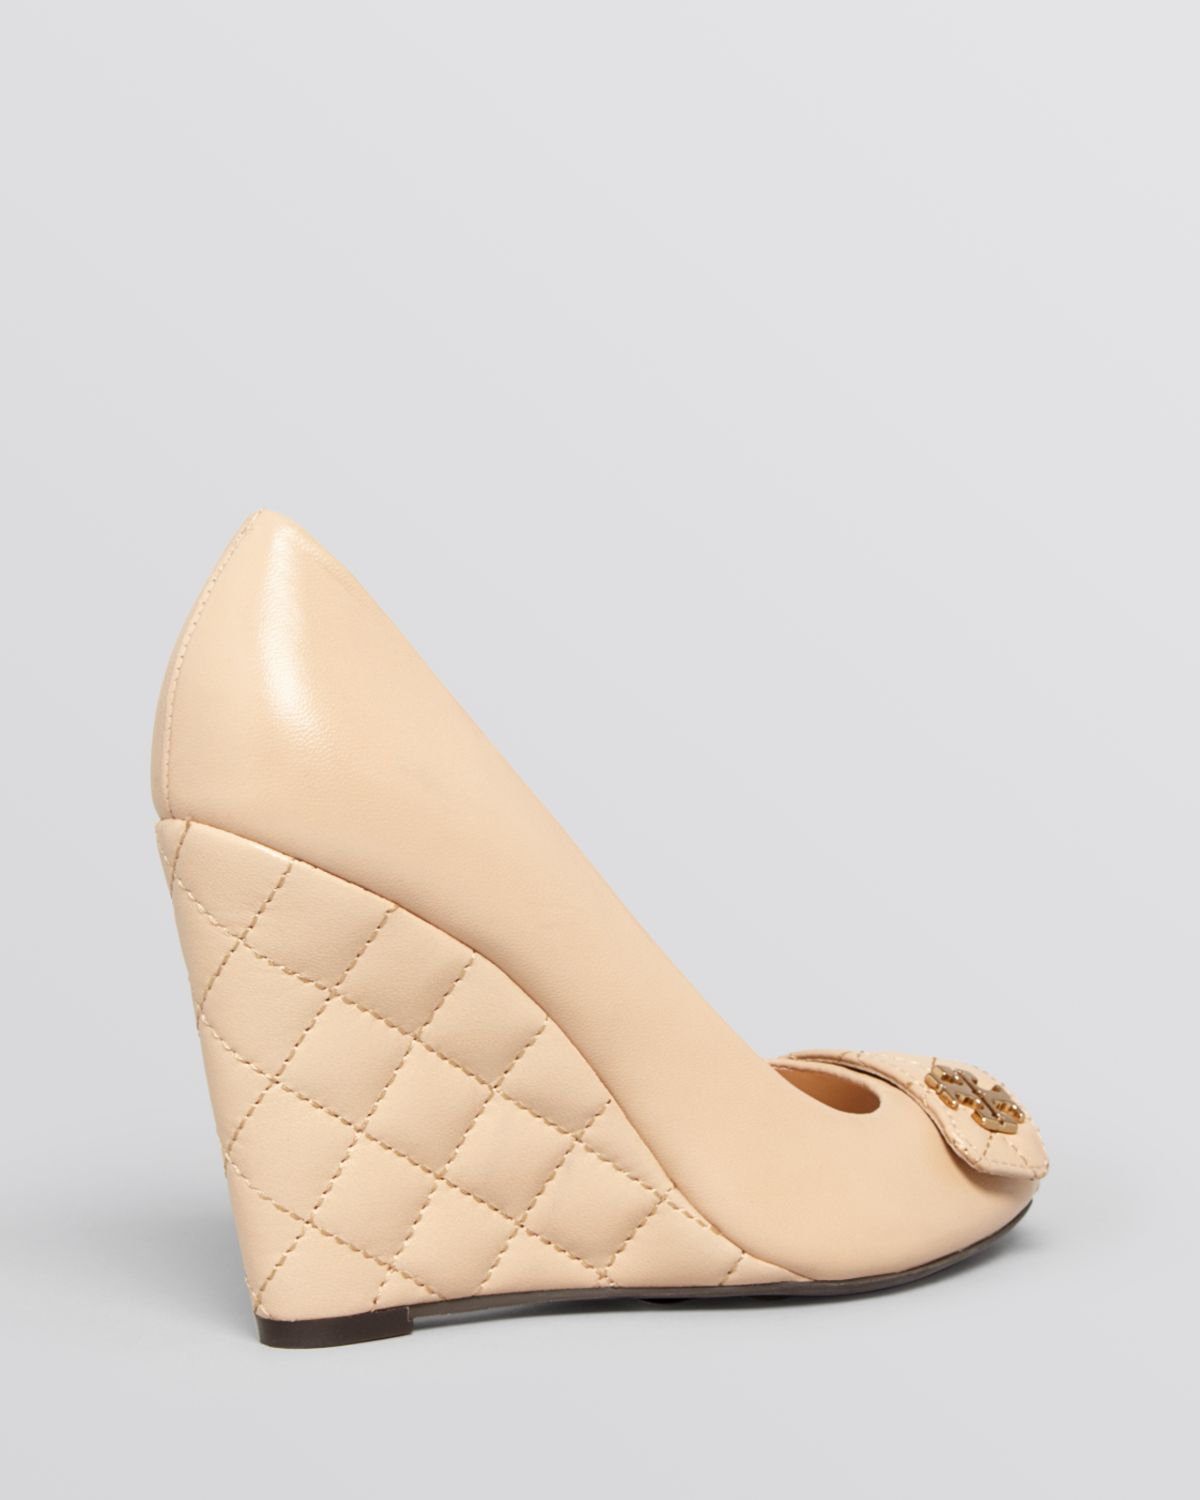 Tory Burch Peep Toe Wedge Pumps - Leila Quilted in Natural | Lyst